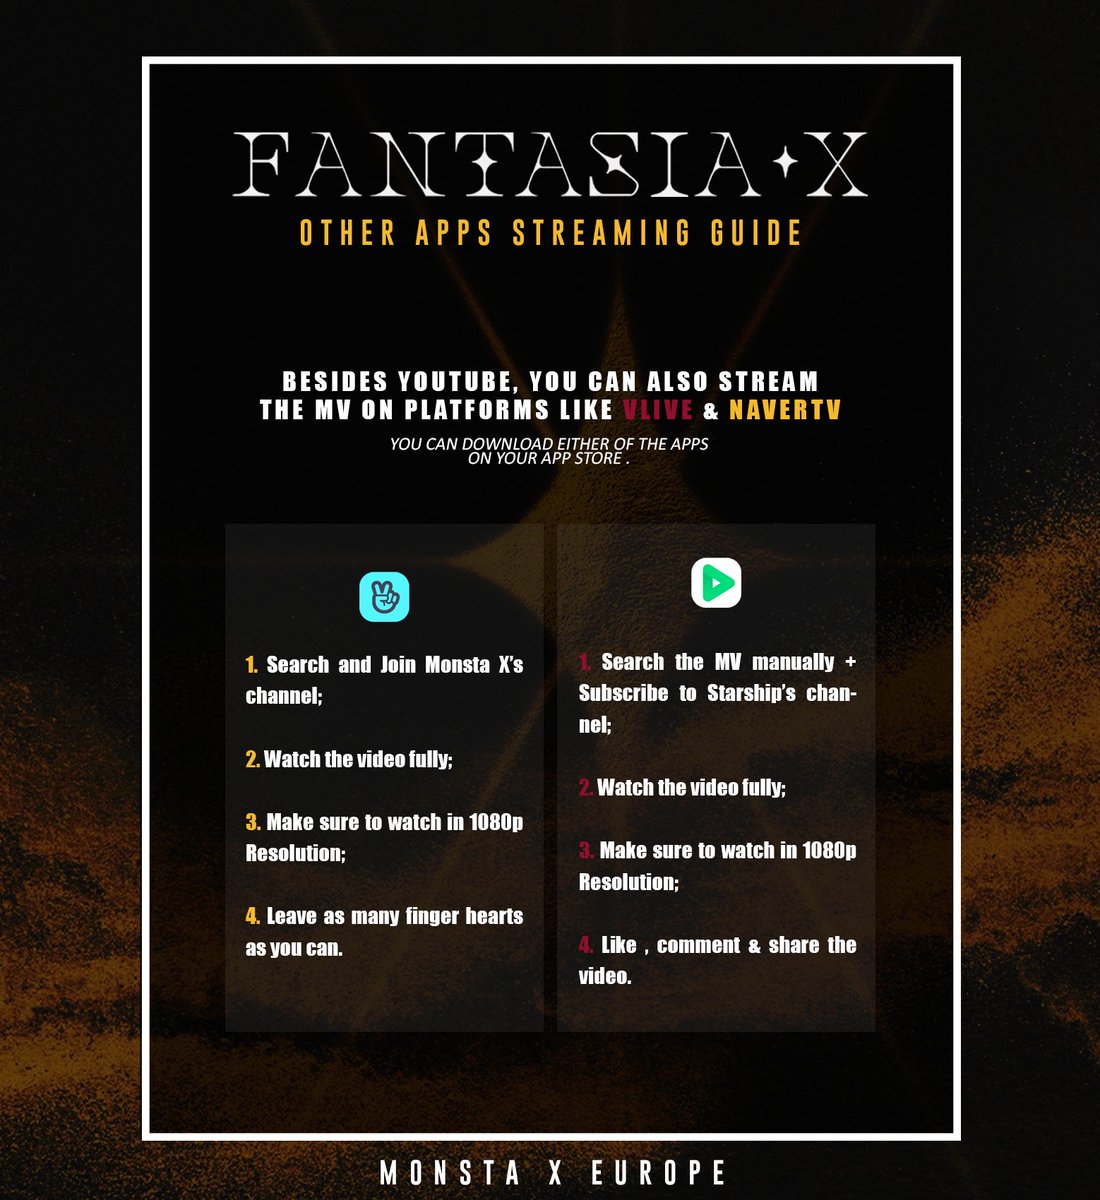  MV Streaming  VLive & NaverTV    You can find the links for the Apps here:  https://monstaxeurope.com/post/188518975444/mvstreaming #몬스타엑스    #MONSTA_X   #몬베베  #MONBEBE #판타지아엑스  #FANTASIA_X @OfficialMonstaX